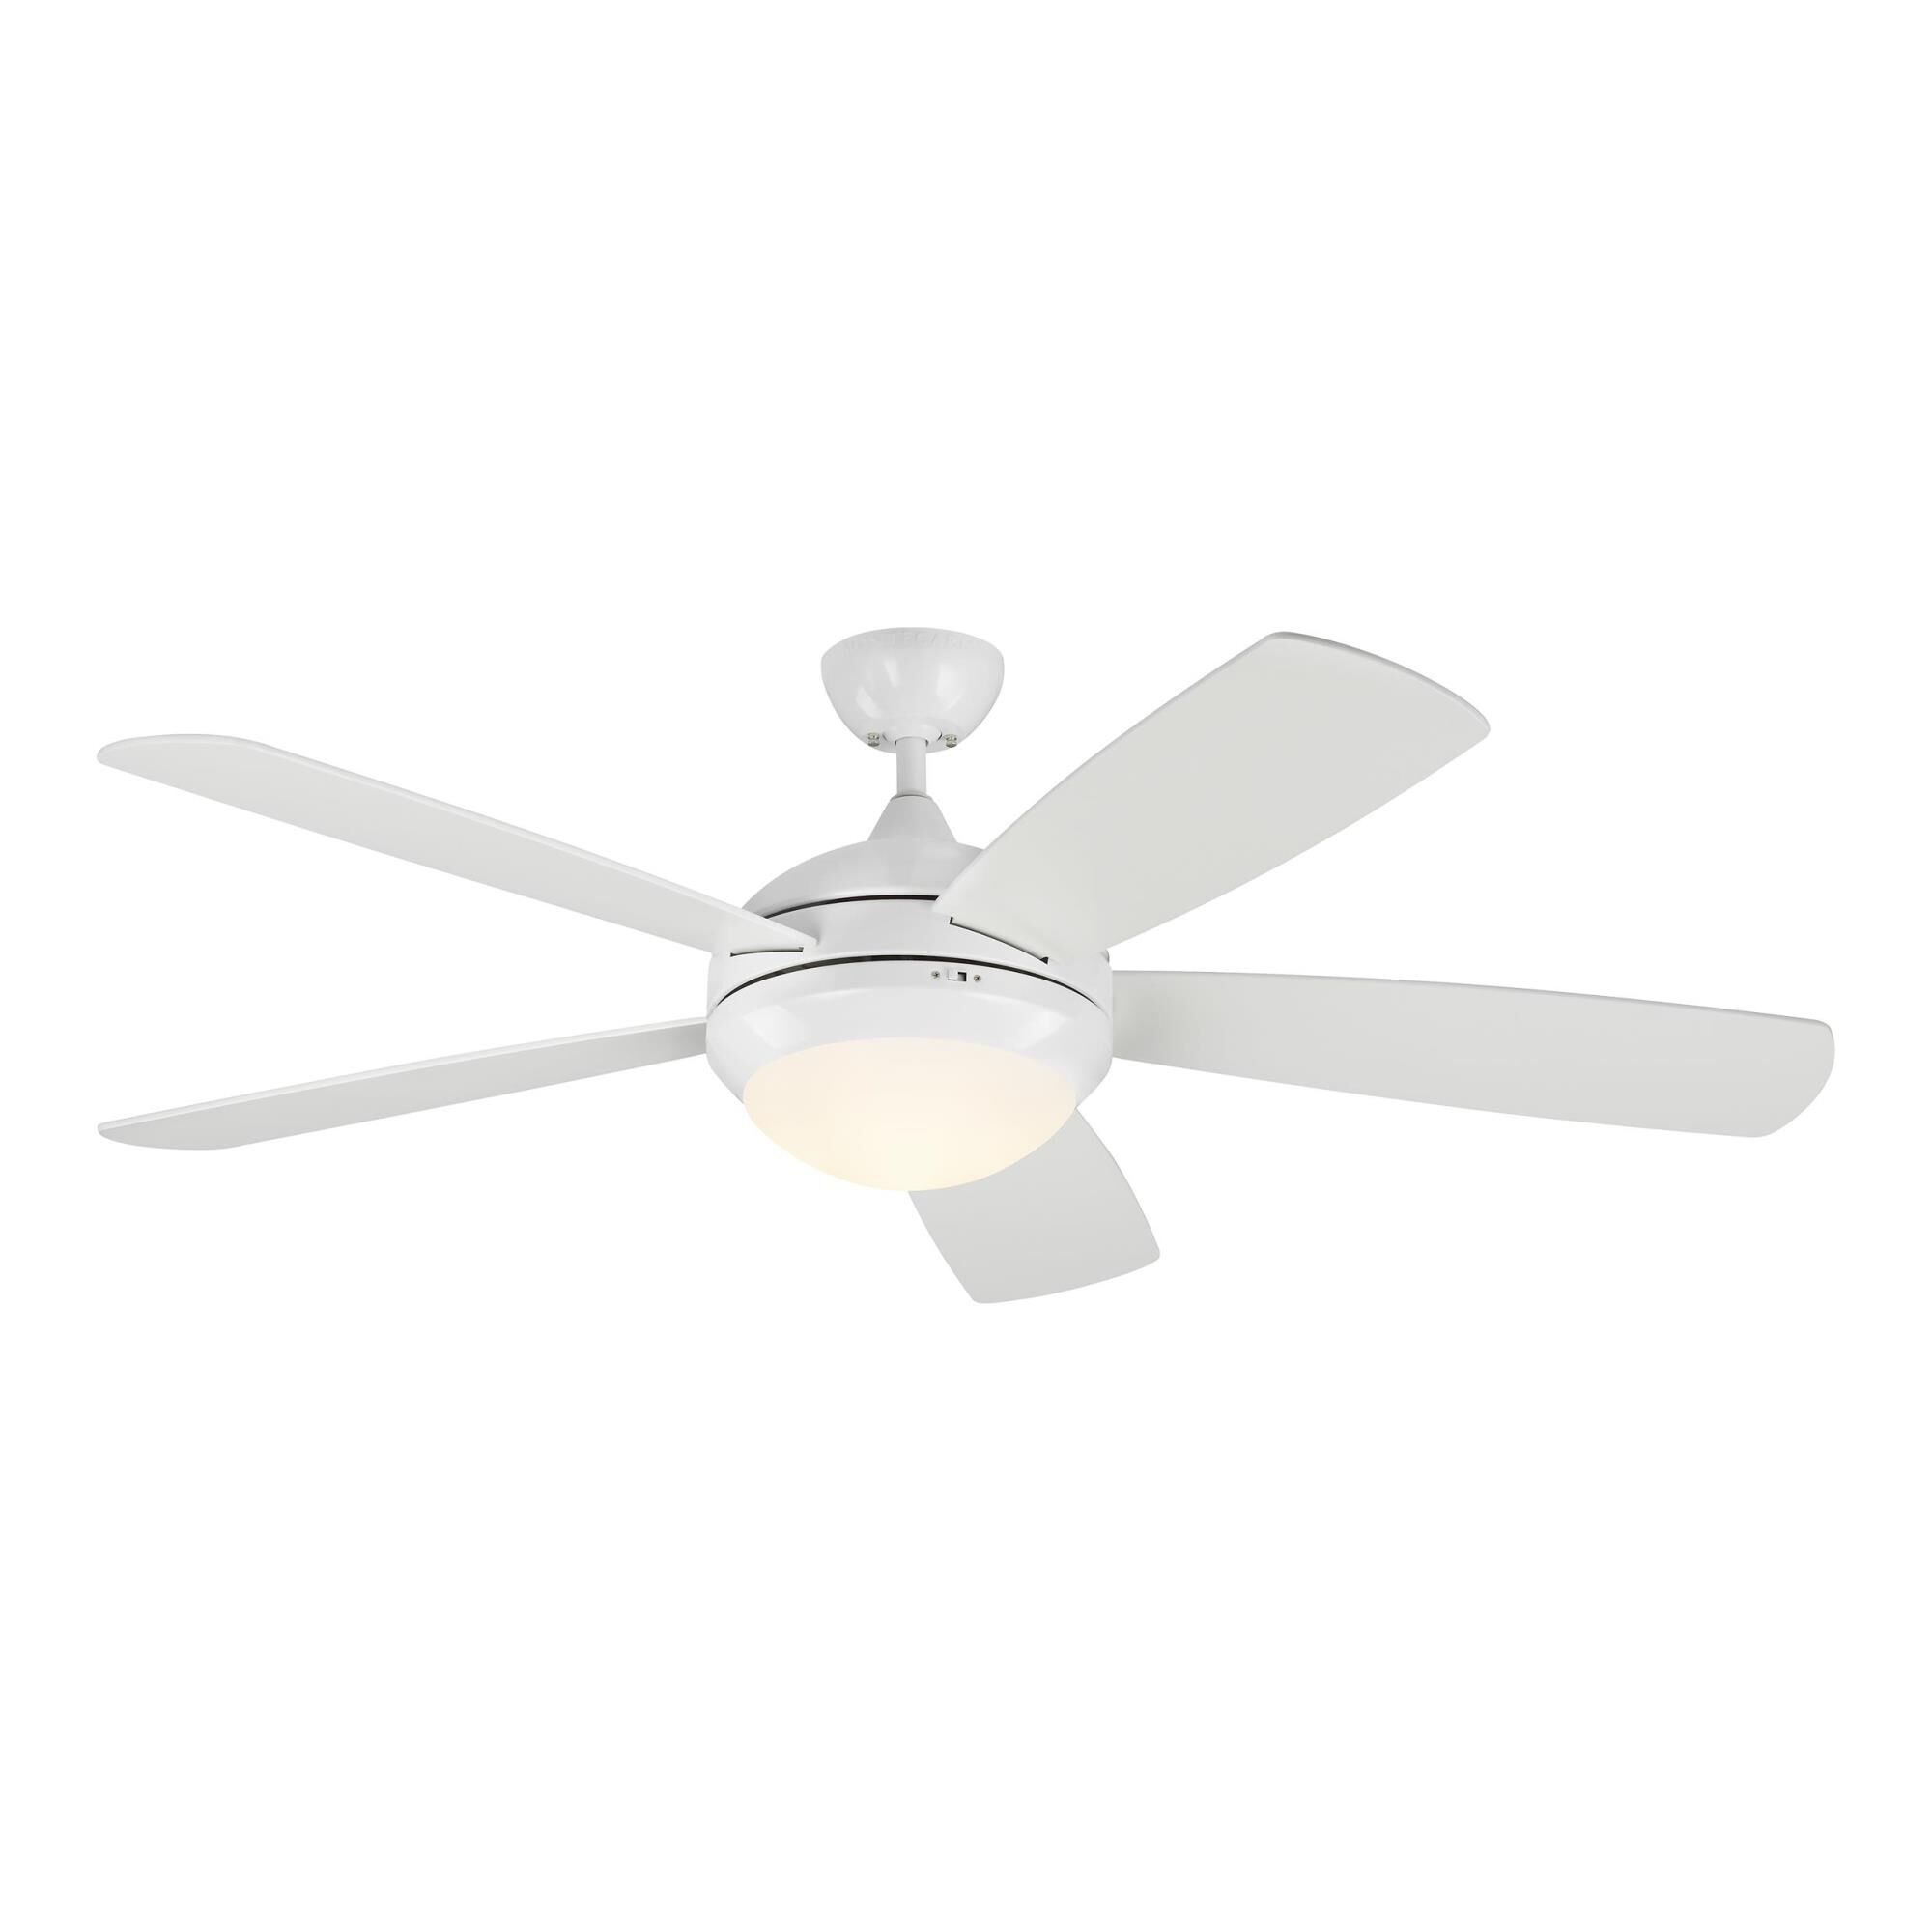 Photos - Fan Generation Lighting Discus Classic Smart 52 Inch Ceiling  with Light Ki